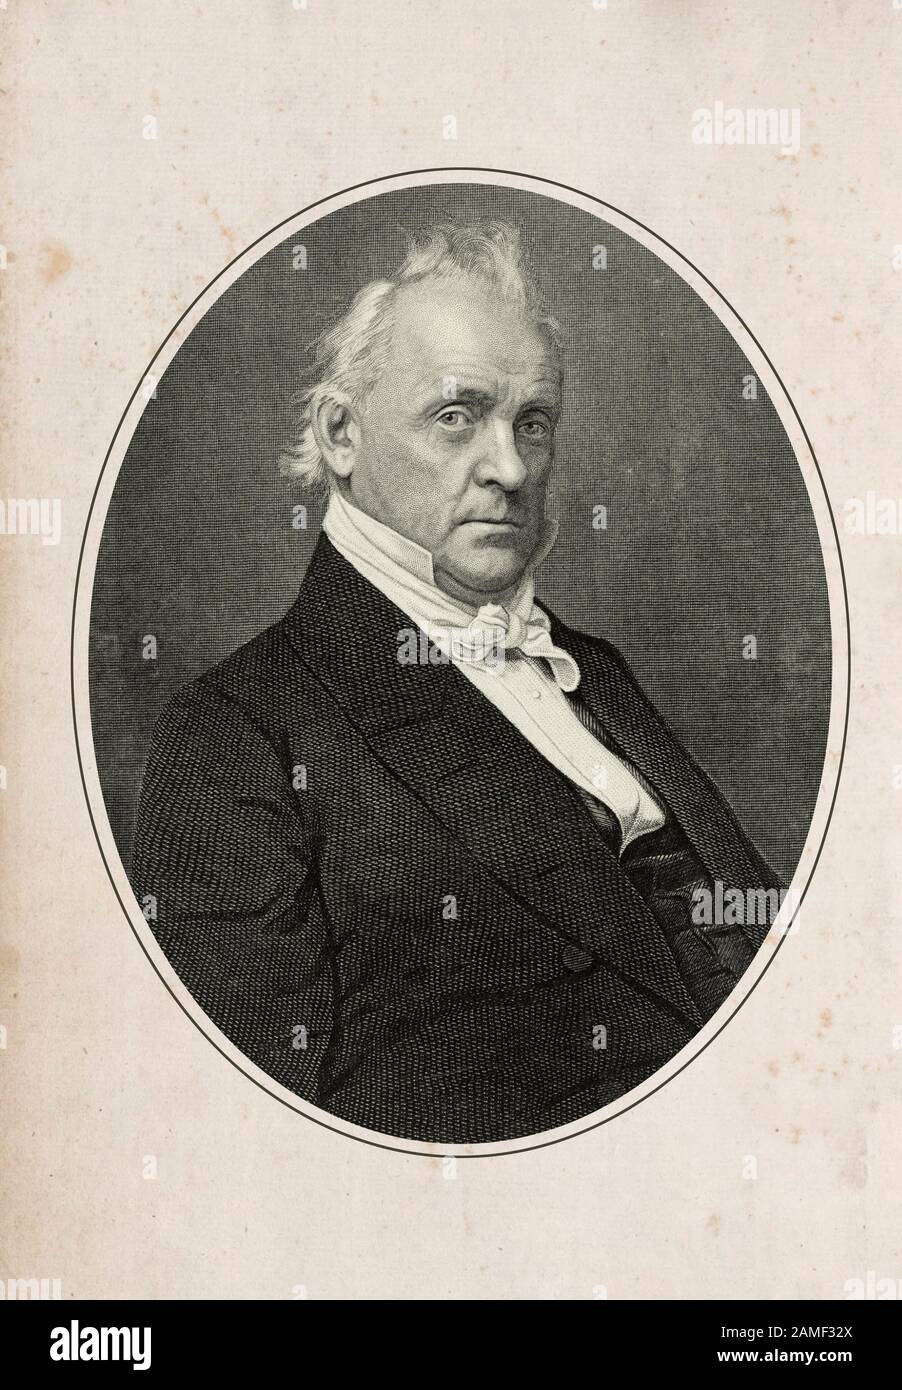 James Buchanan Jr. (1791 – 1868) was an American politician who served as the 15th president of the United States (1857–1861), serving prior to the Am Stock Photo